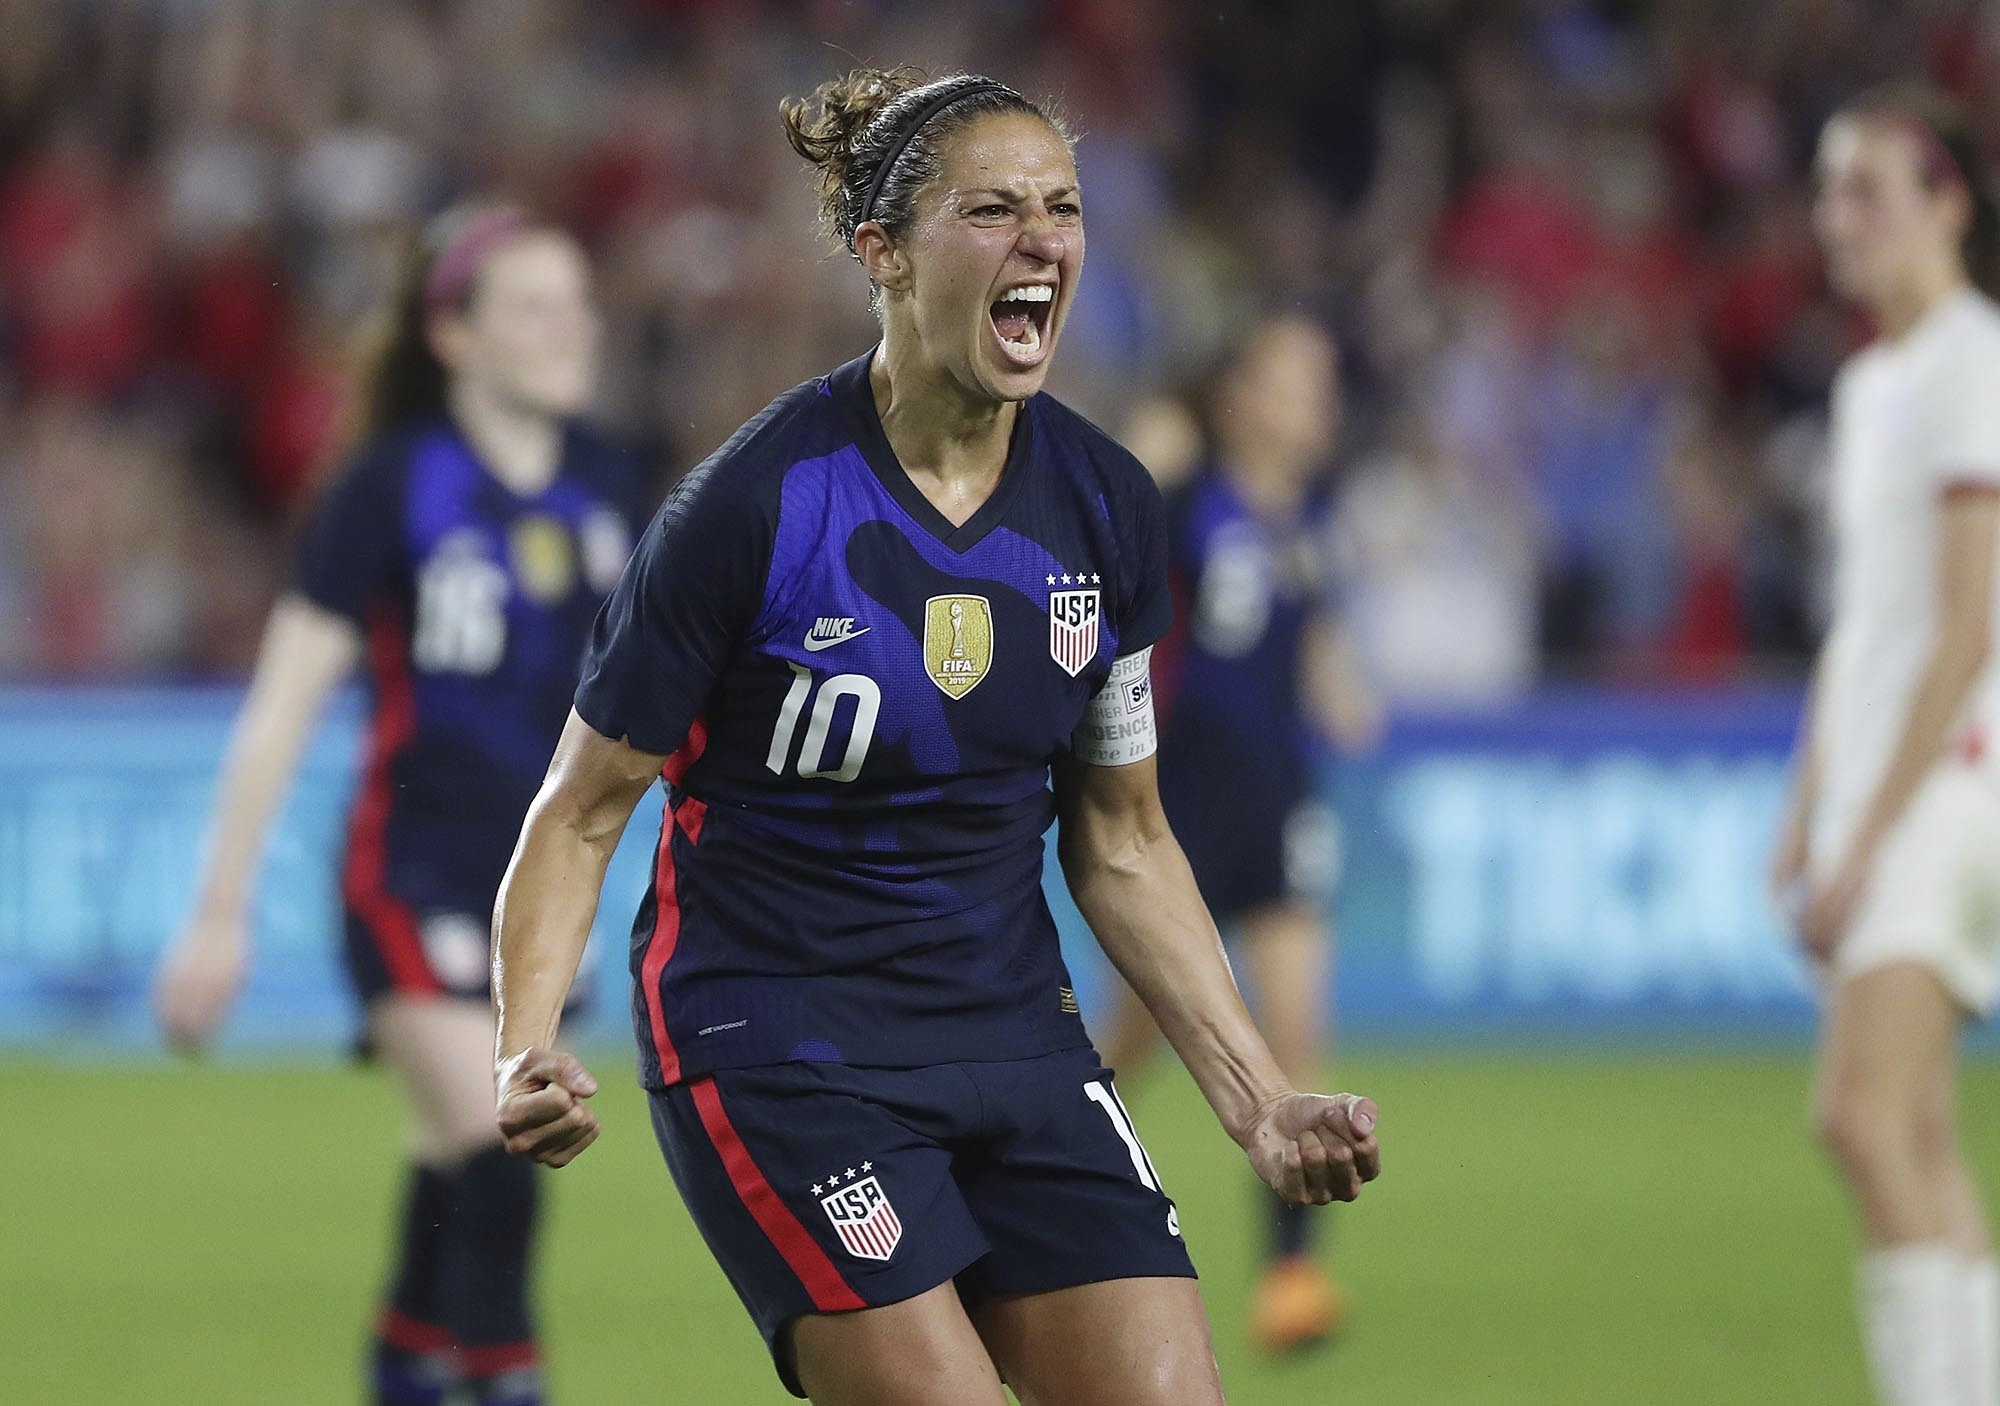 Carli Lloyd, who scored the goal that clinched gold medals in 2008 and 2012...